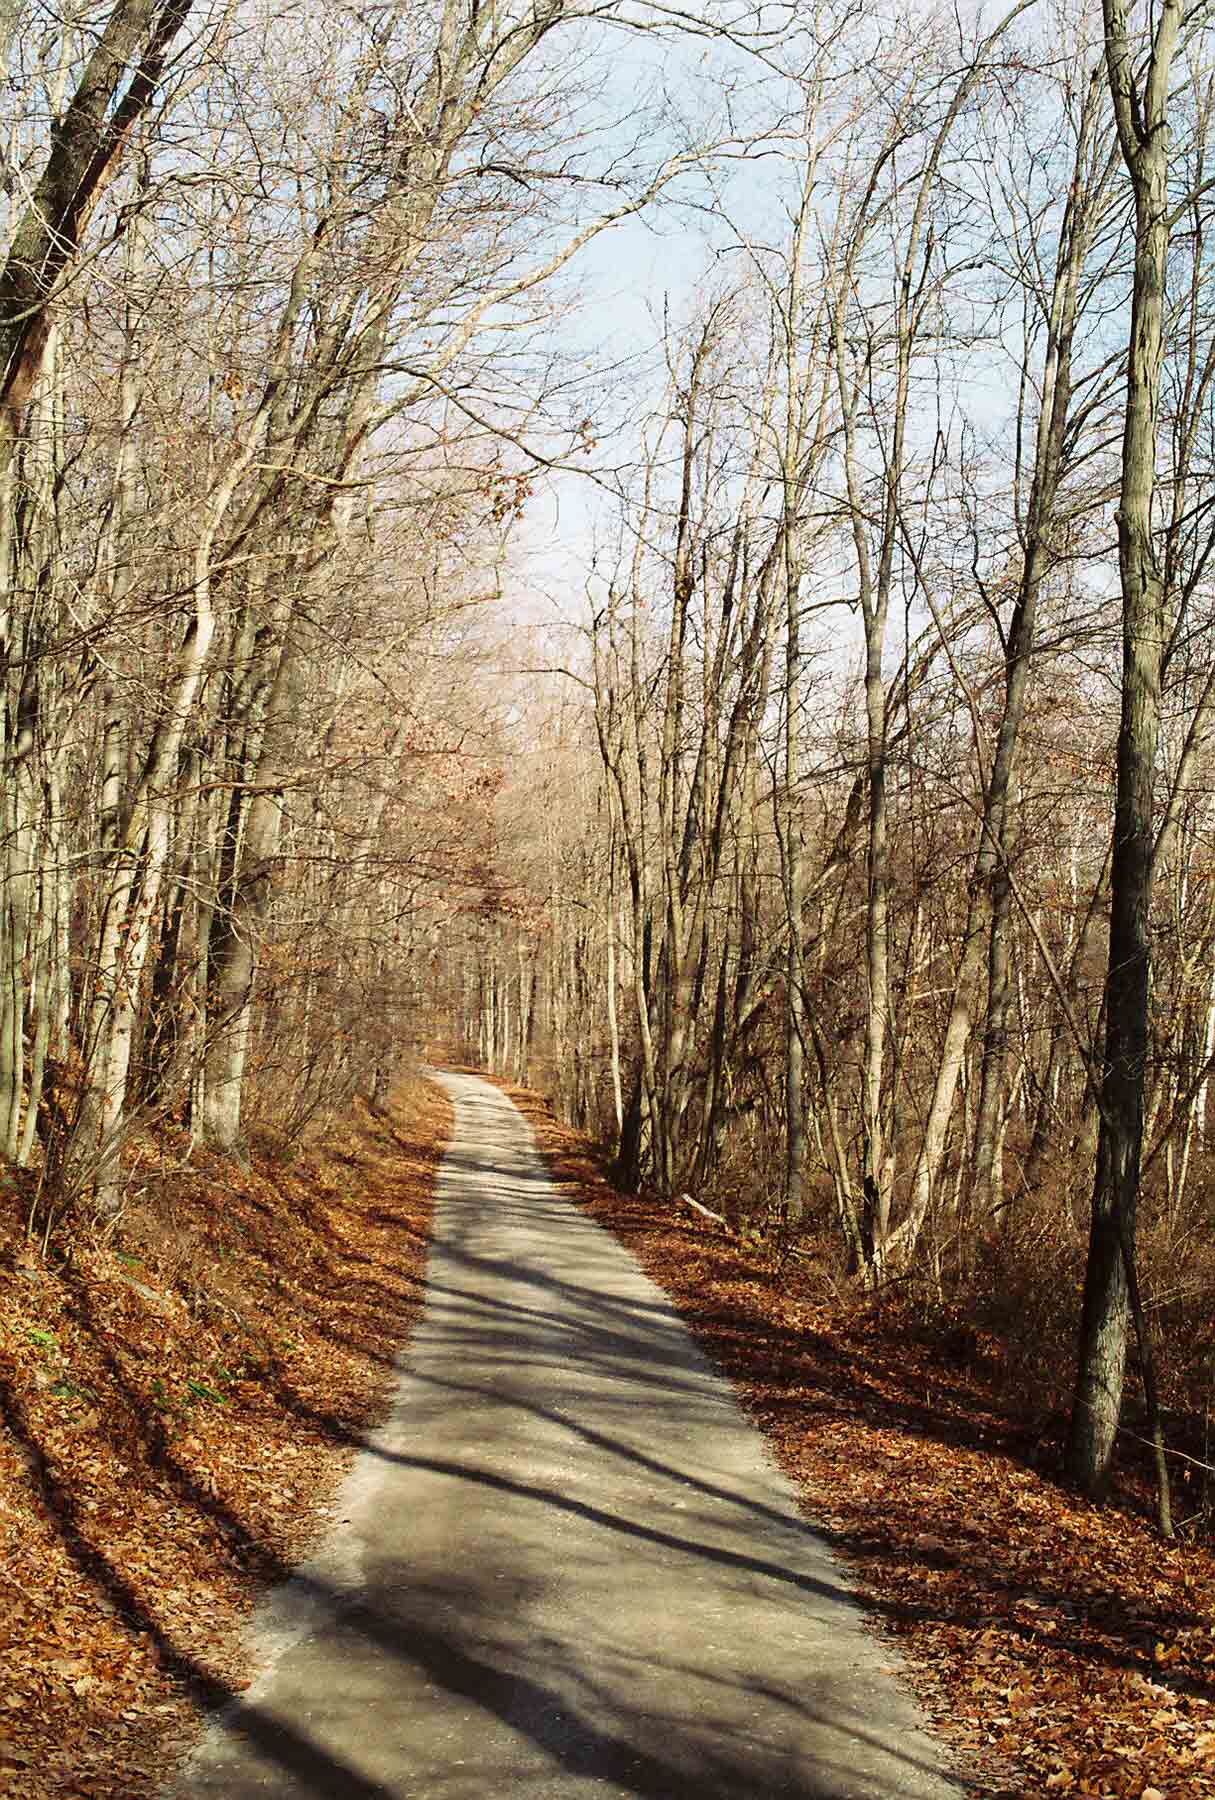 The southernmost mile (Mile 5.4 to 6.4) of the "River Walk" along the Housatonic follows a gravel road open to automobile traffic from Kent.  Courtesy dlcul@conncoll.edu